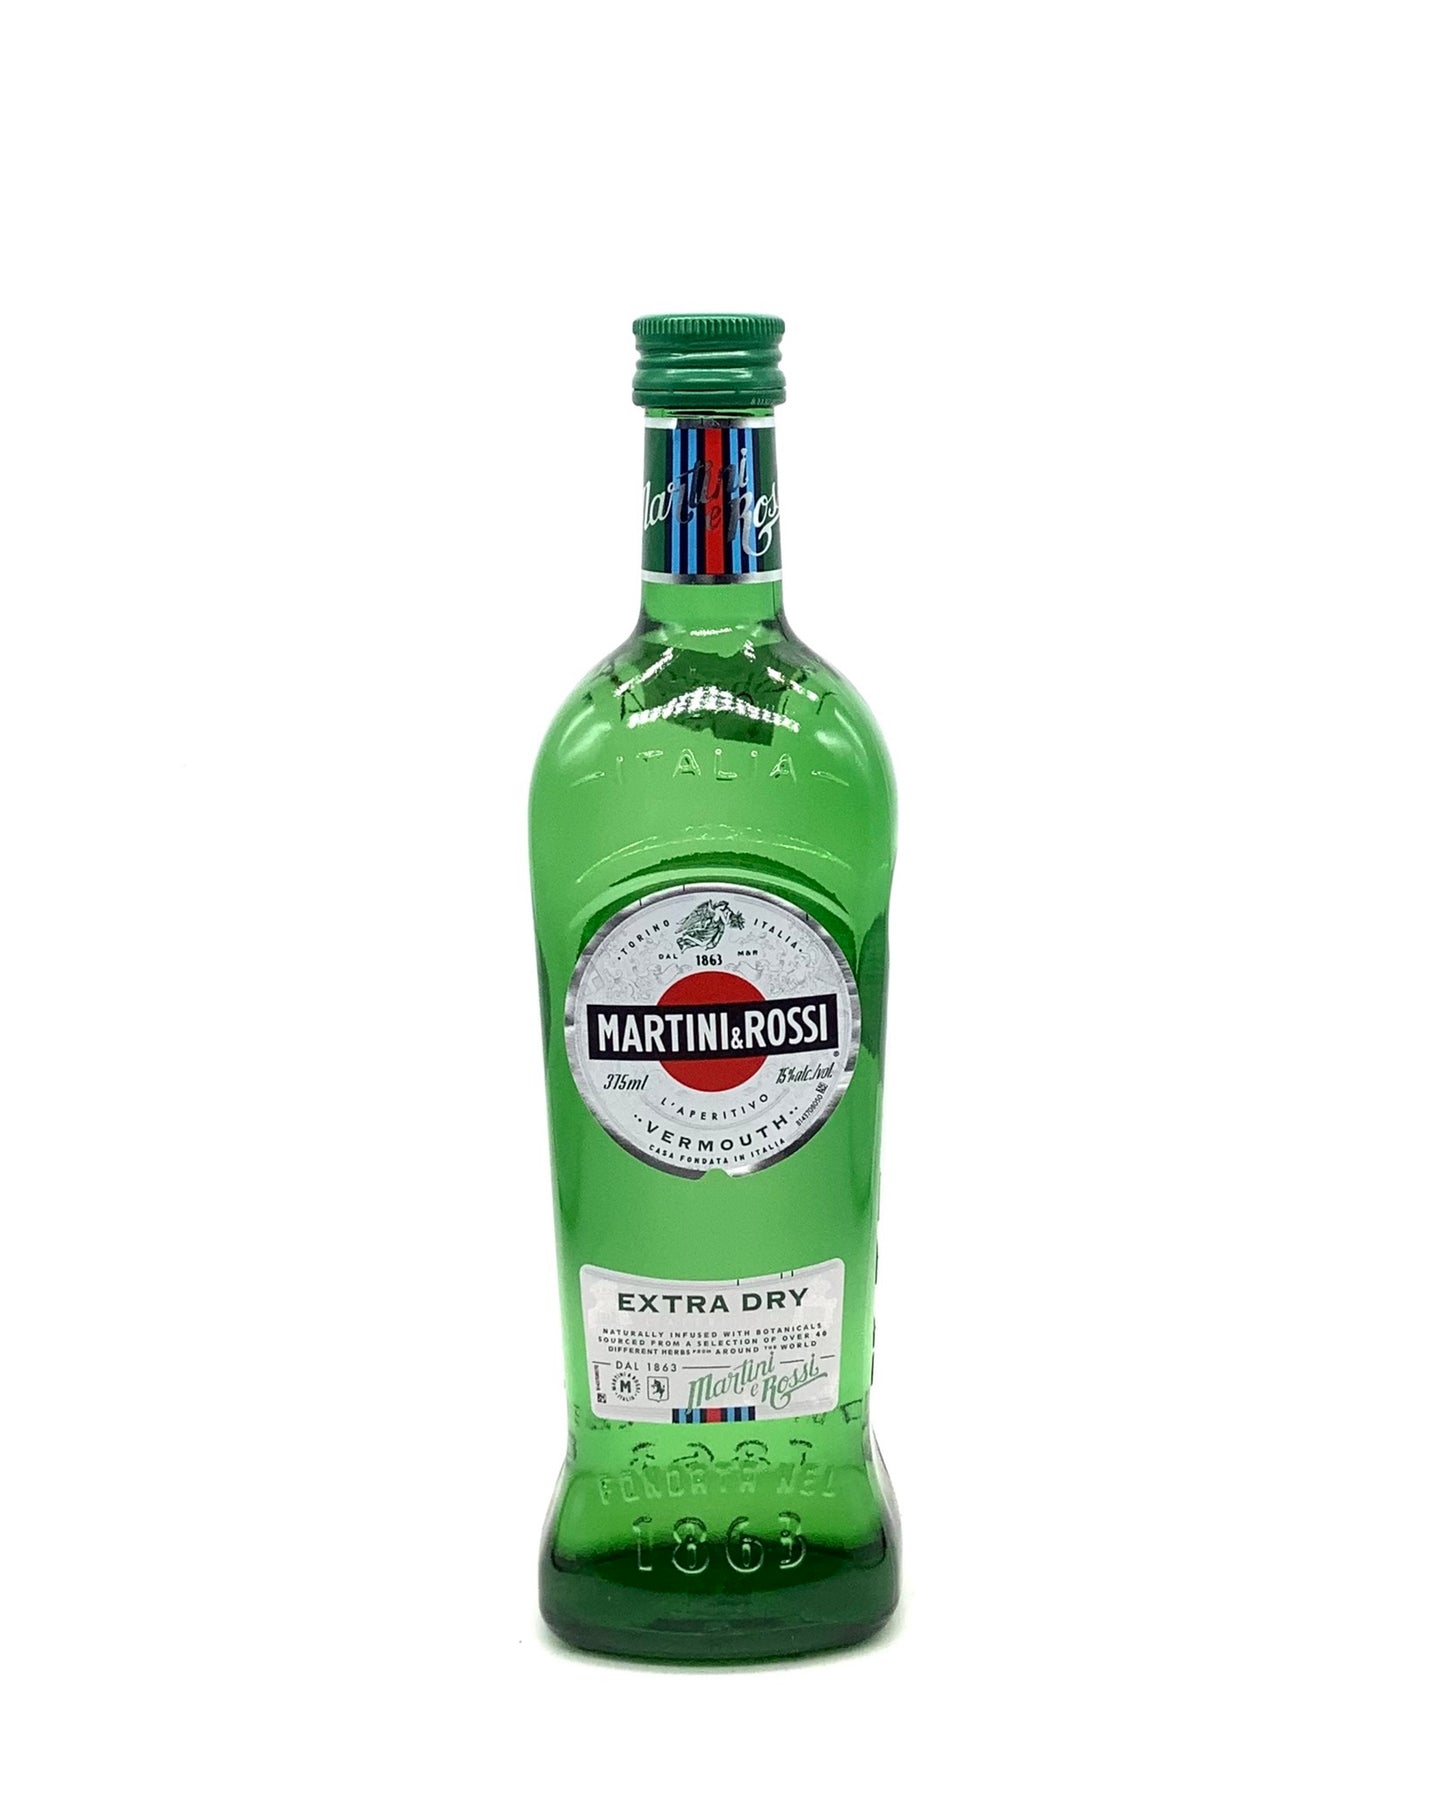 Martini & Rossi Extra Dry Vermouth 375ml